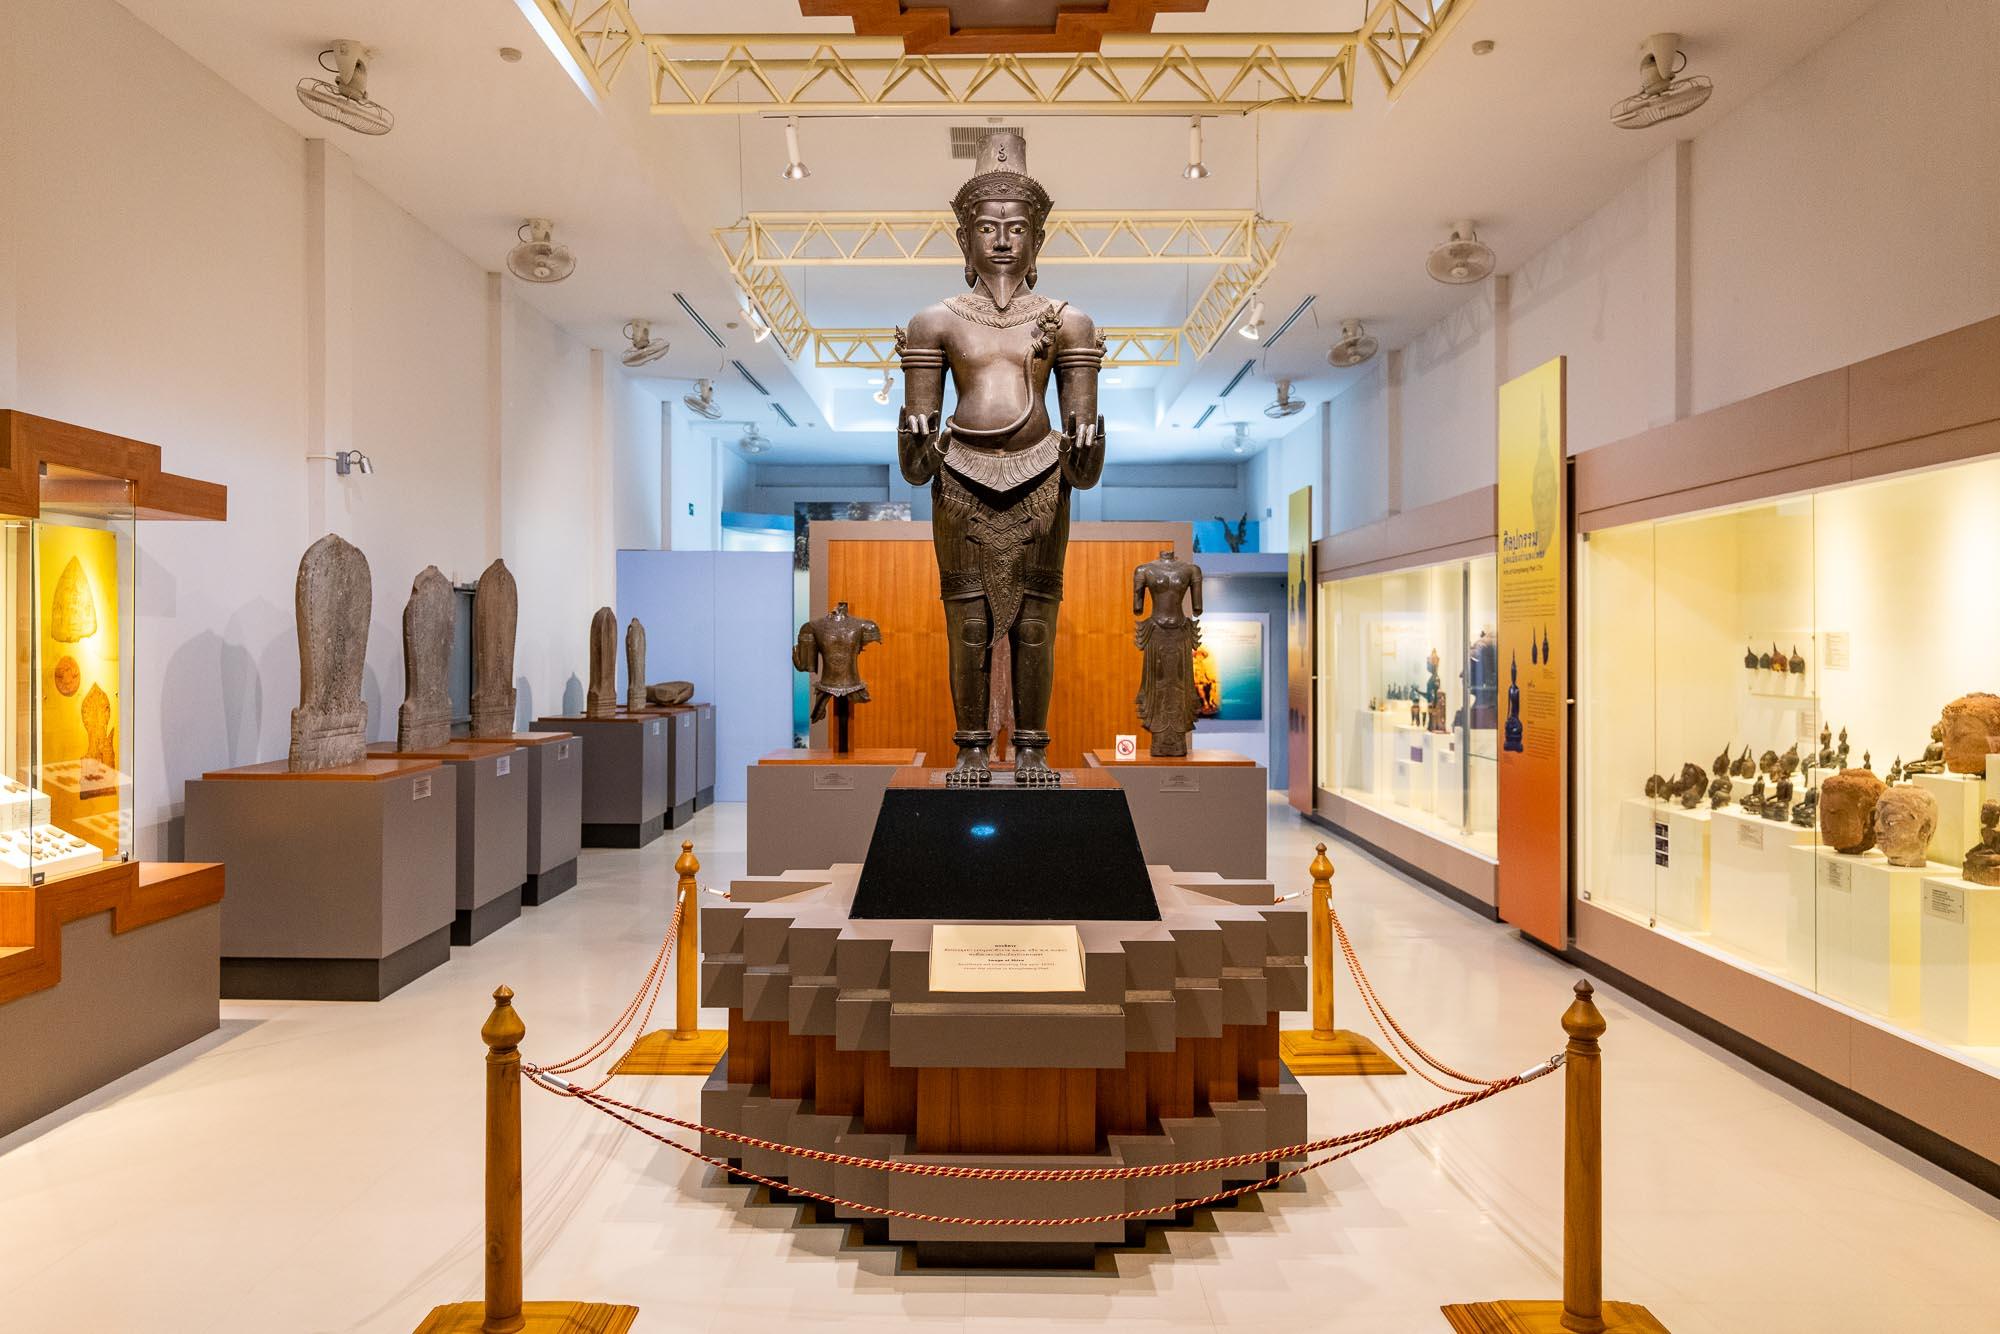 The bronze statue of the Hindu god Shiva was found in a shrine in the east of the Historical Park and is one of the museum's most important pieces. – © Michael Turtle